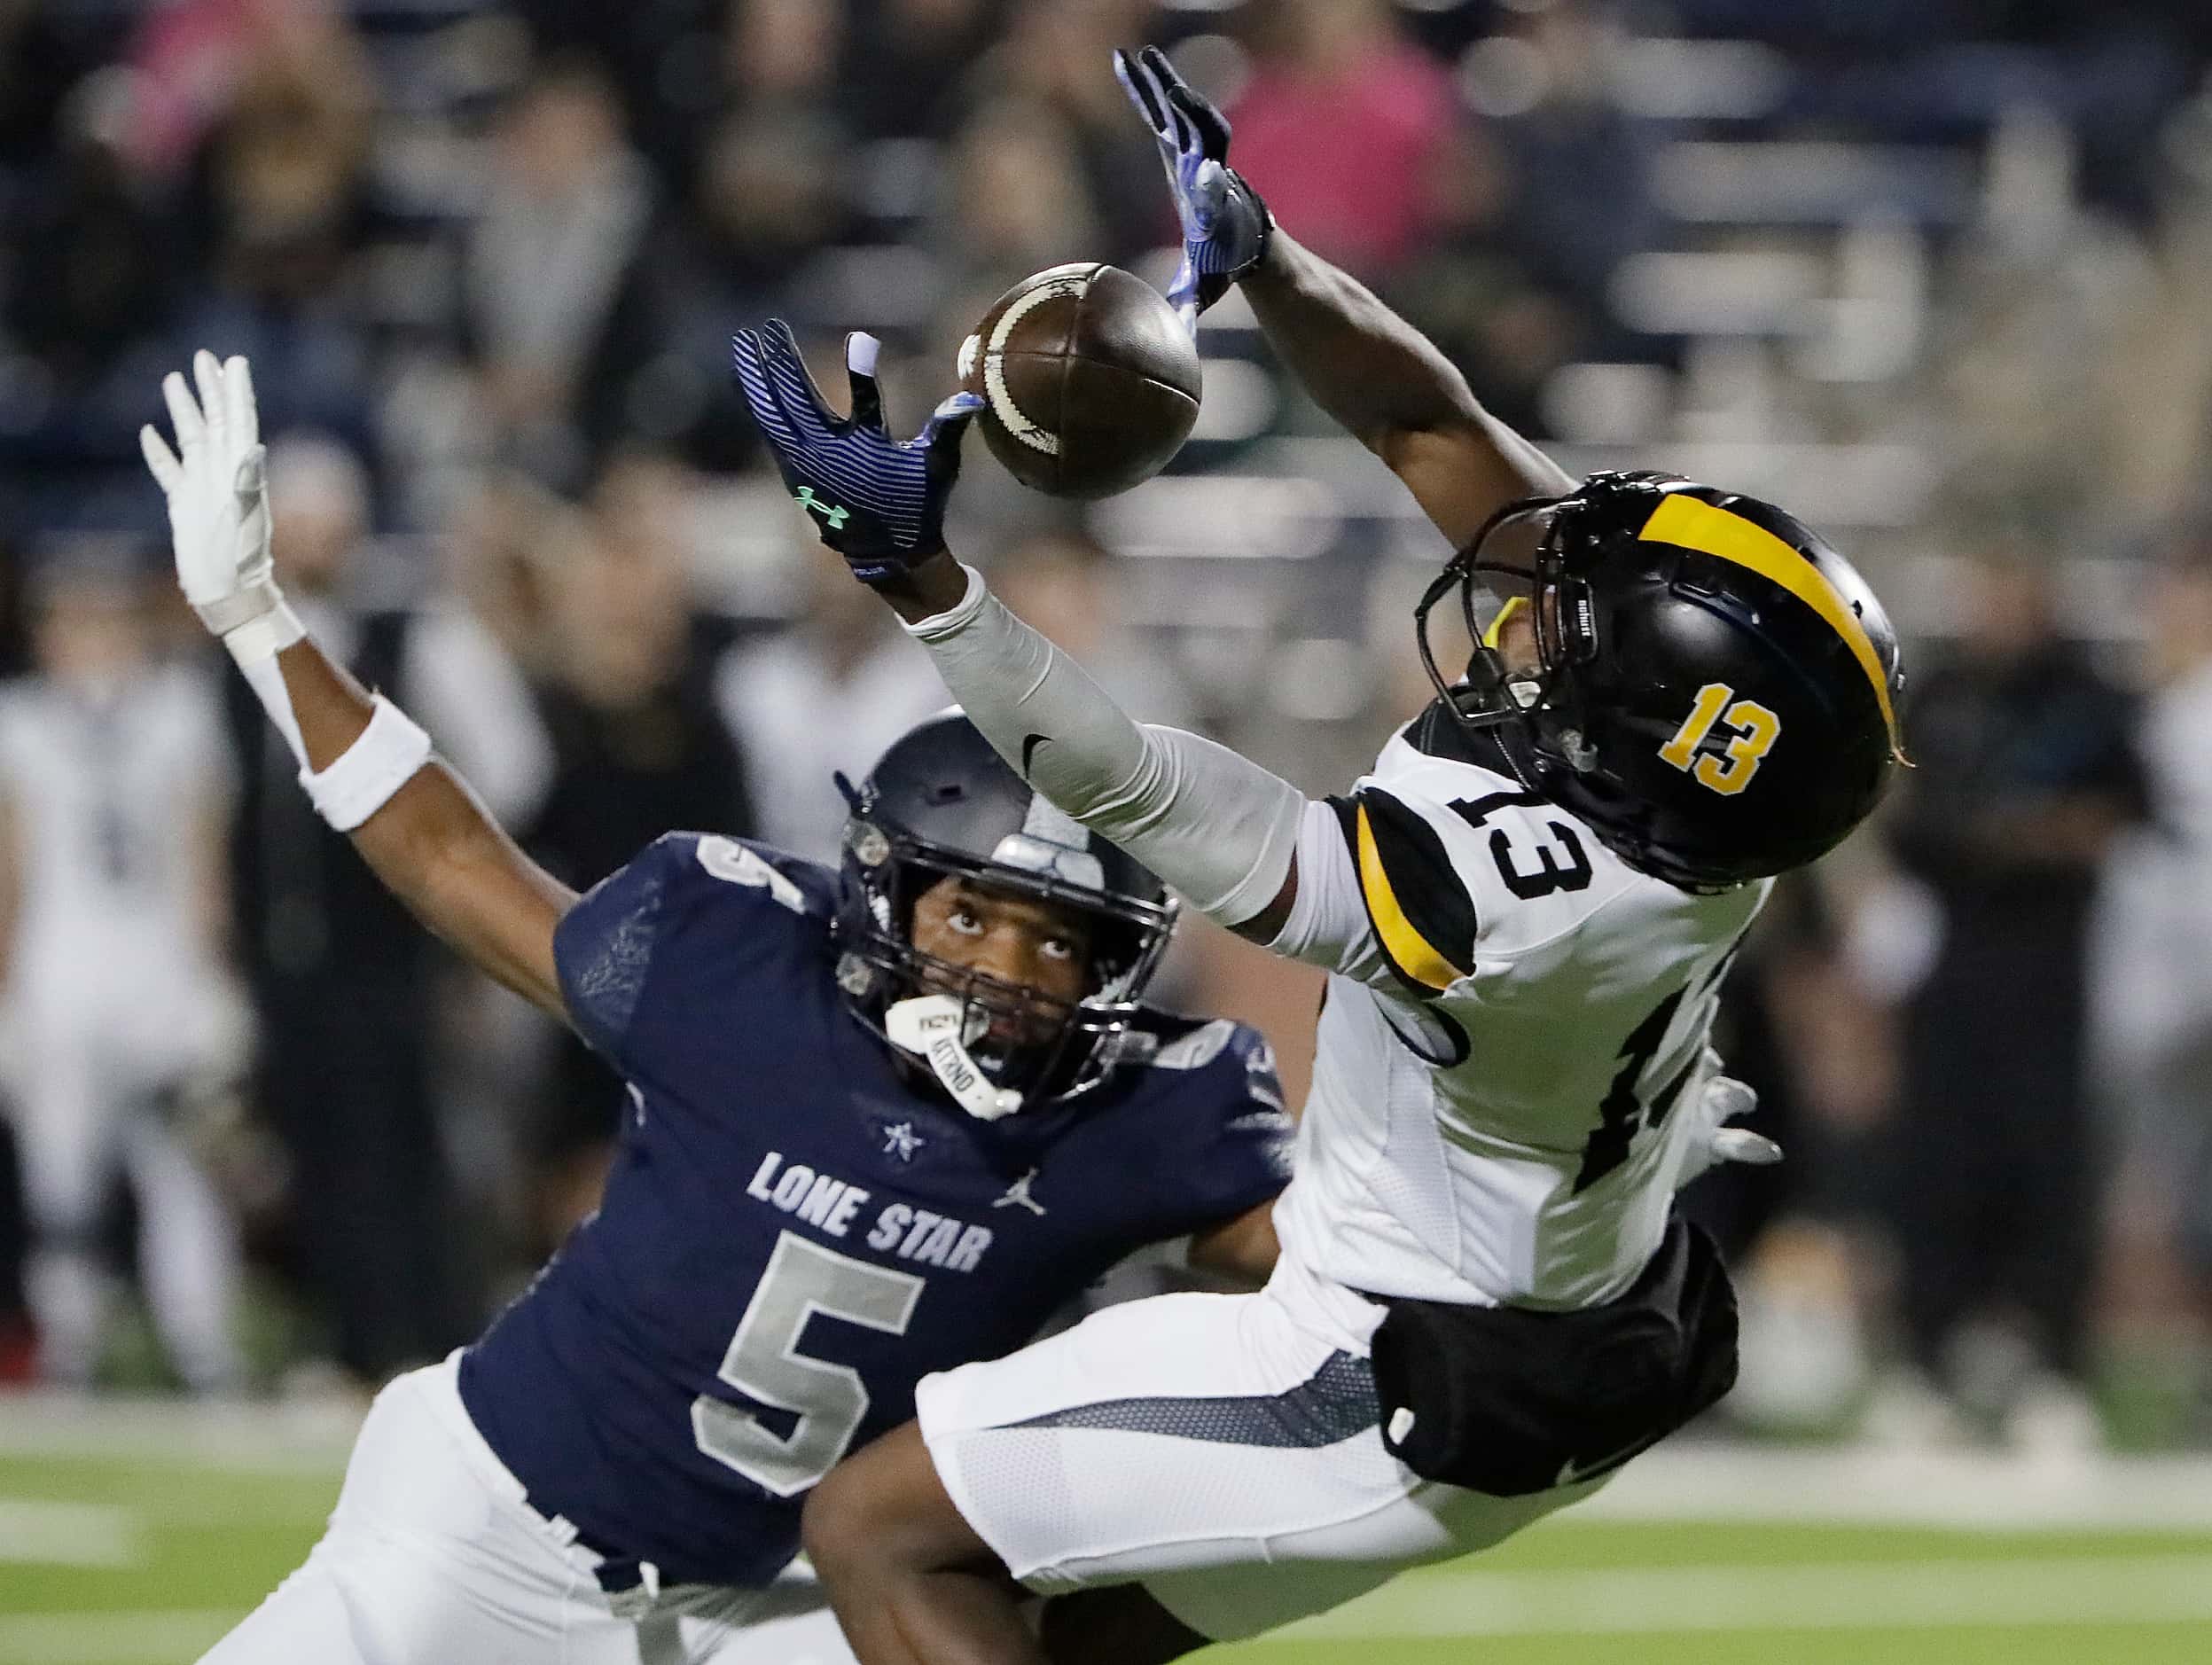 Forney High School wide receiver Imari Jehiel (13) was unable to make the catch defended by...